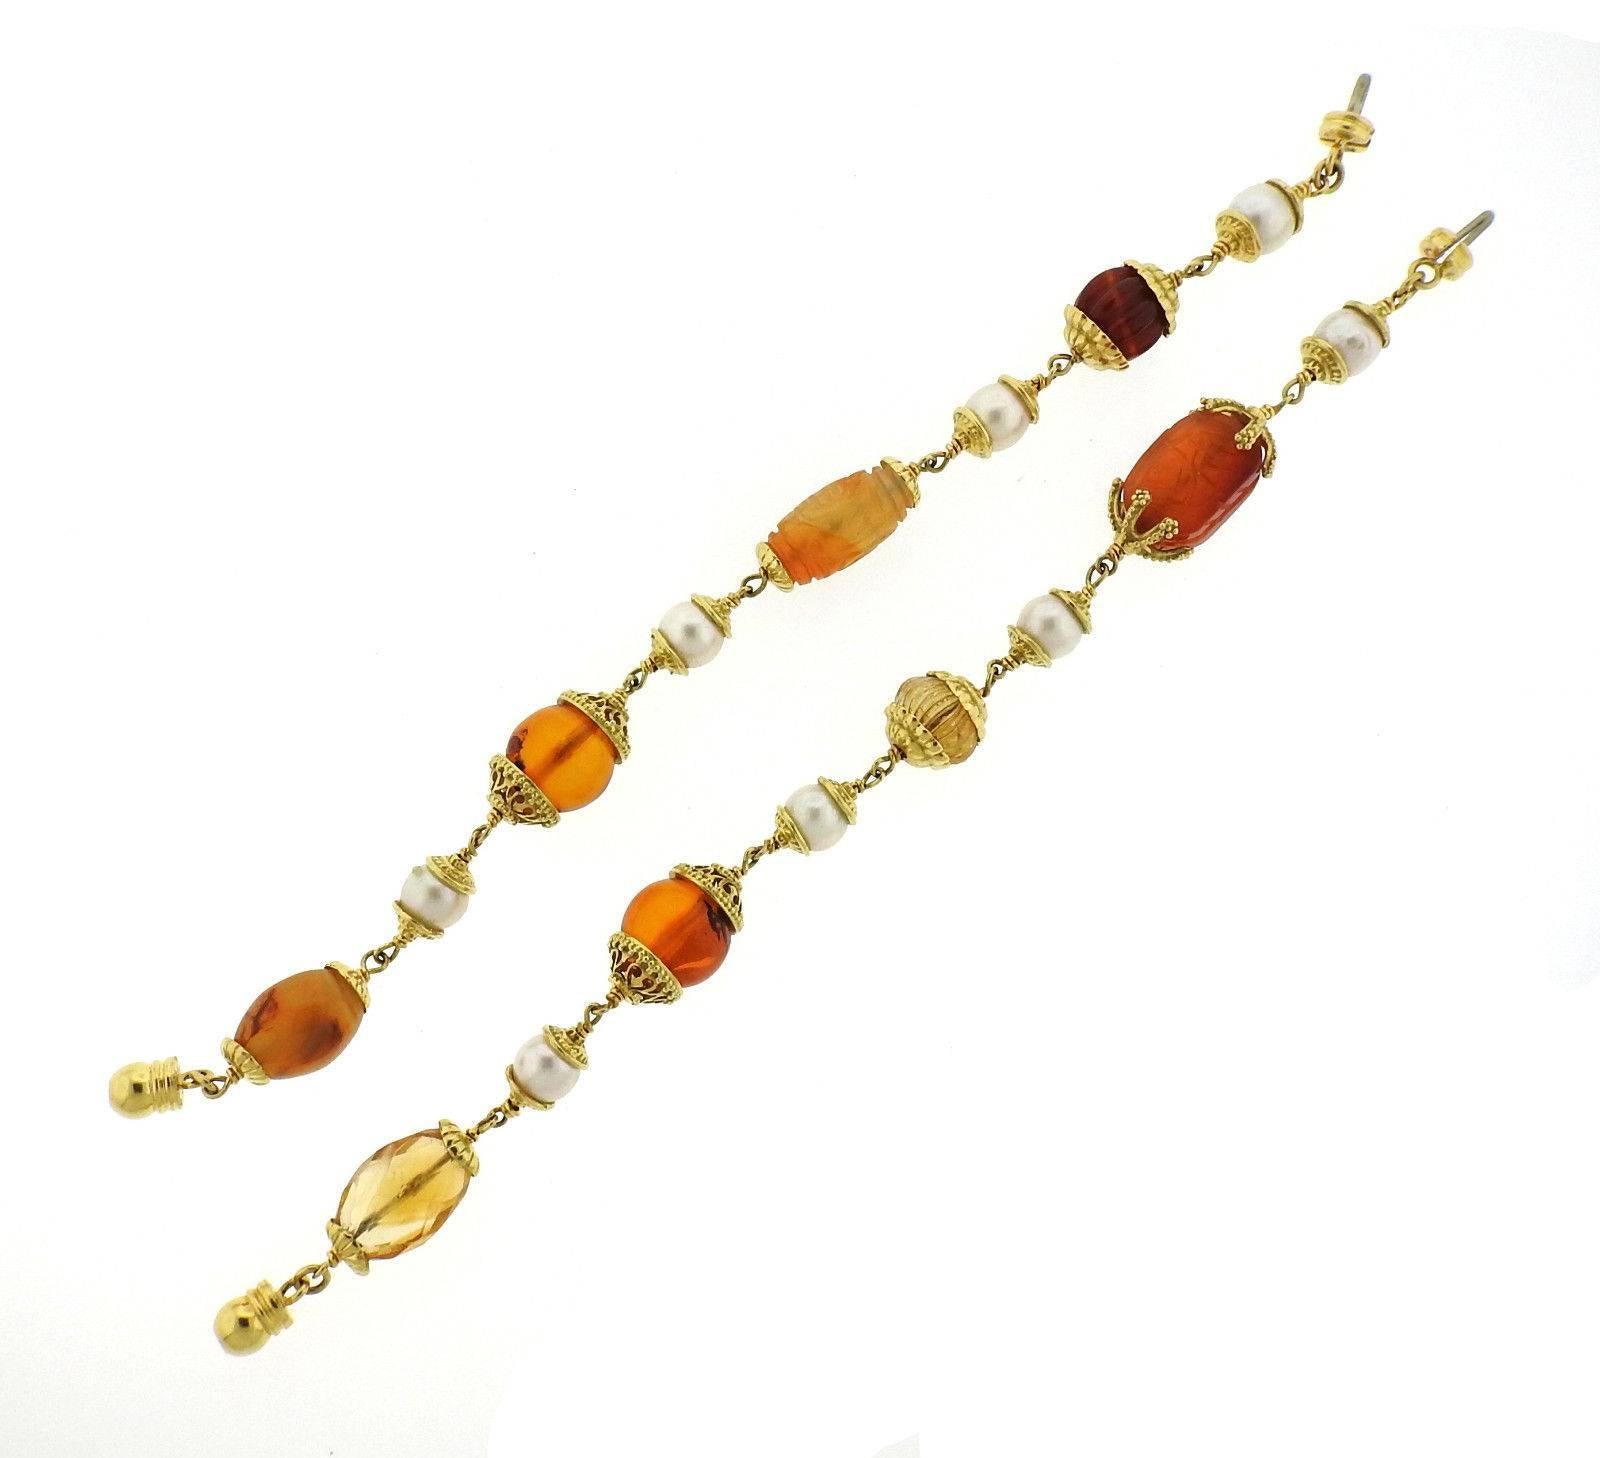 A pair of 18k yellow gold bracelets set with multi color gemstones and 8.7mm pearls. The bracelets are each 8 1/8